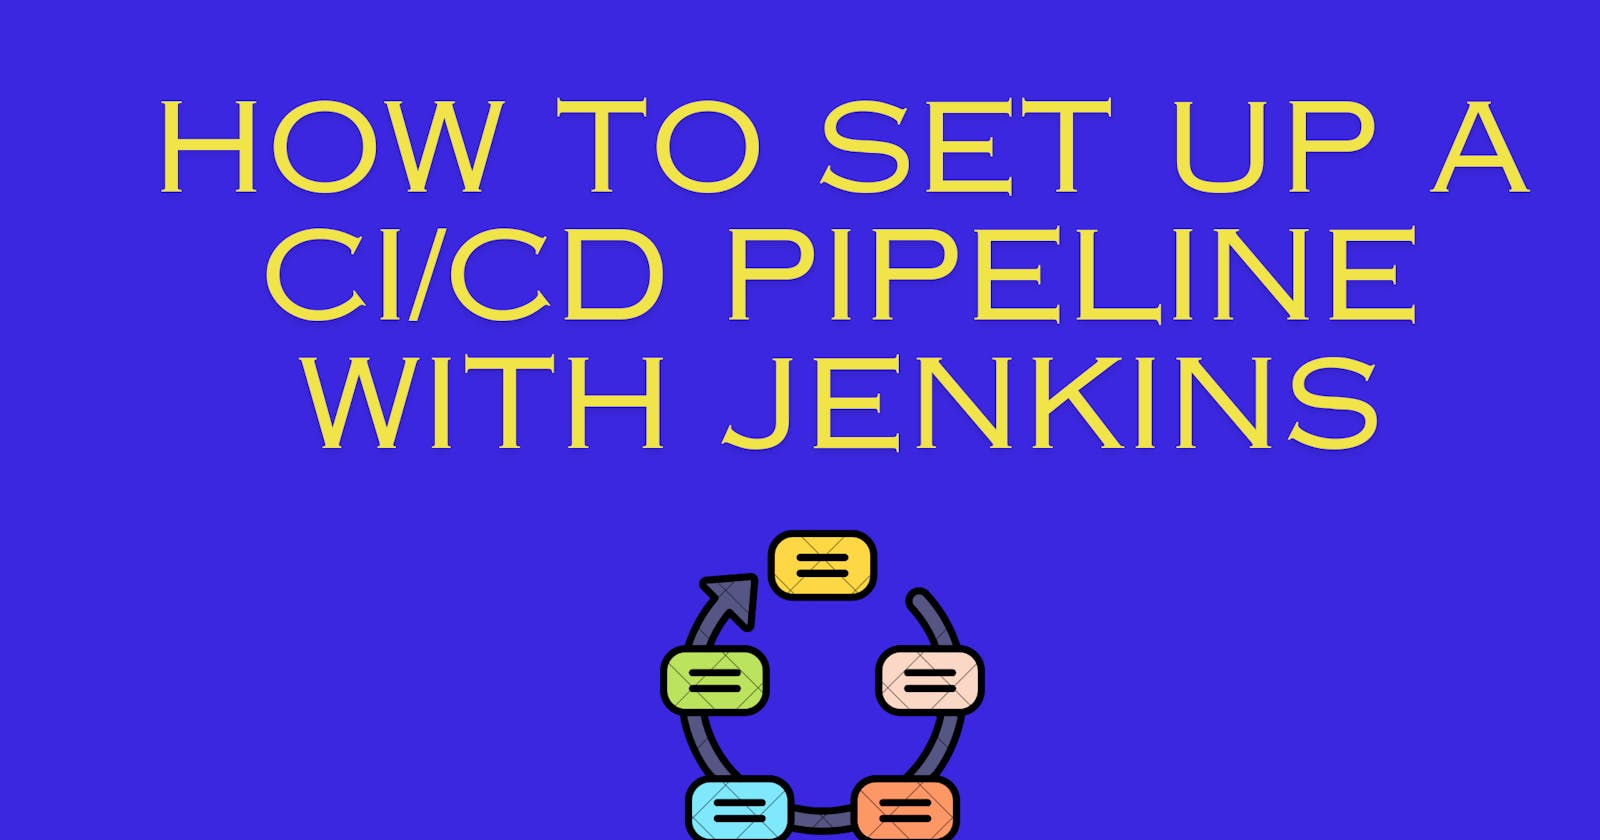 How to set up a CI/CD Pipeline with Jenkins